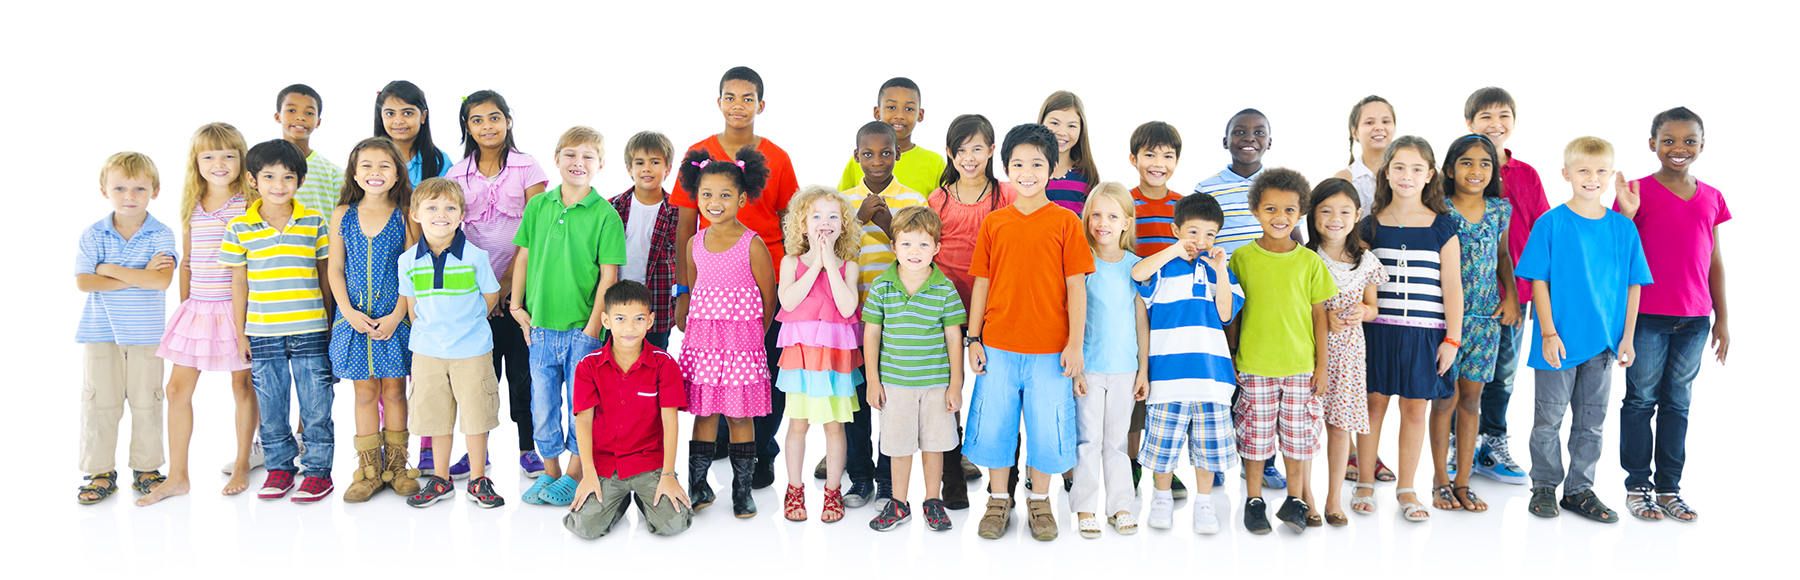 photo: 30+ children wearing colorful clothes in group, white background